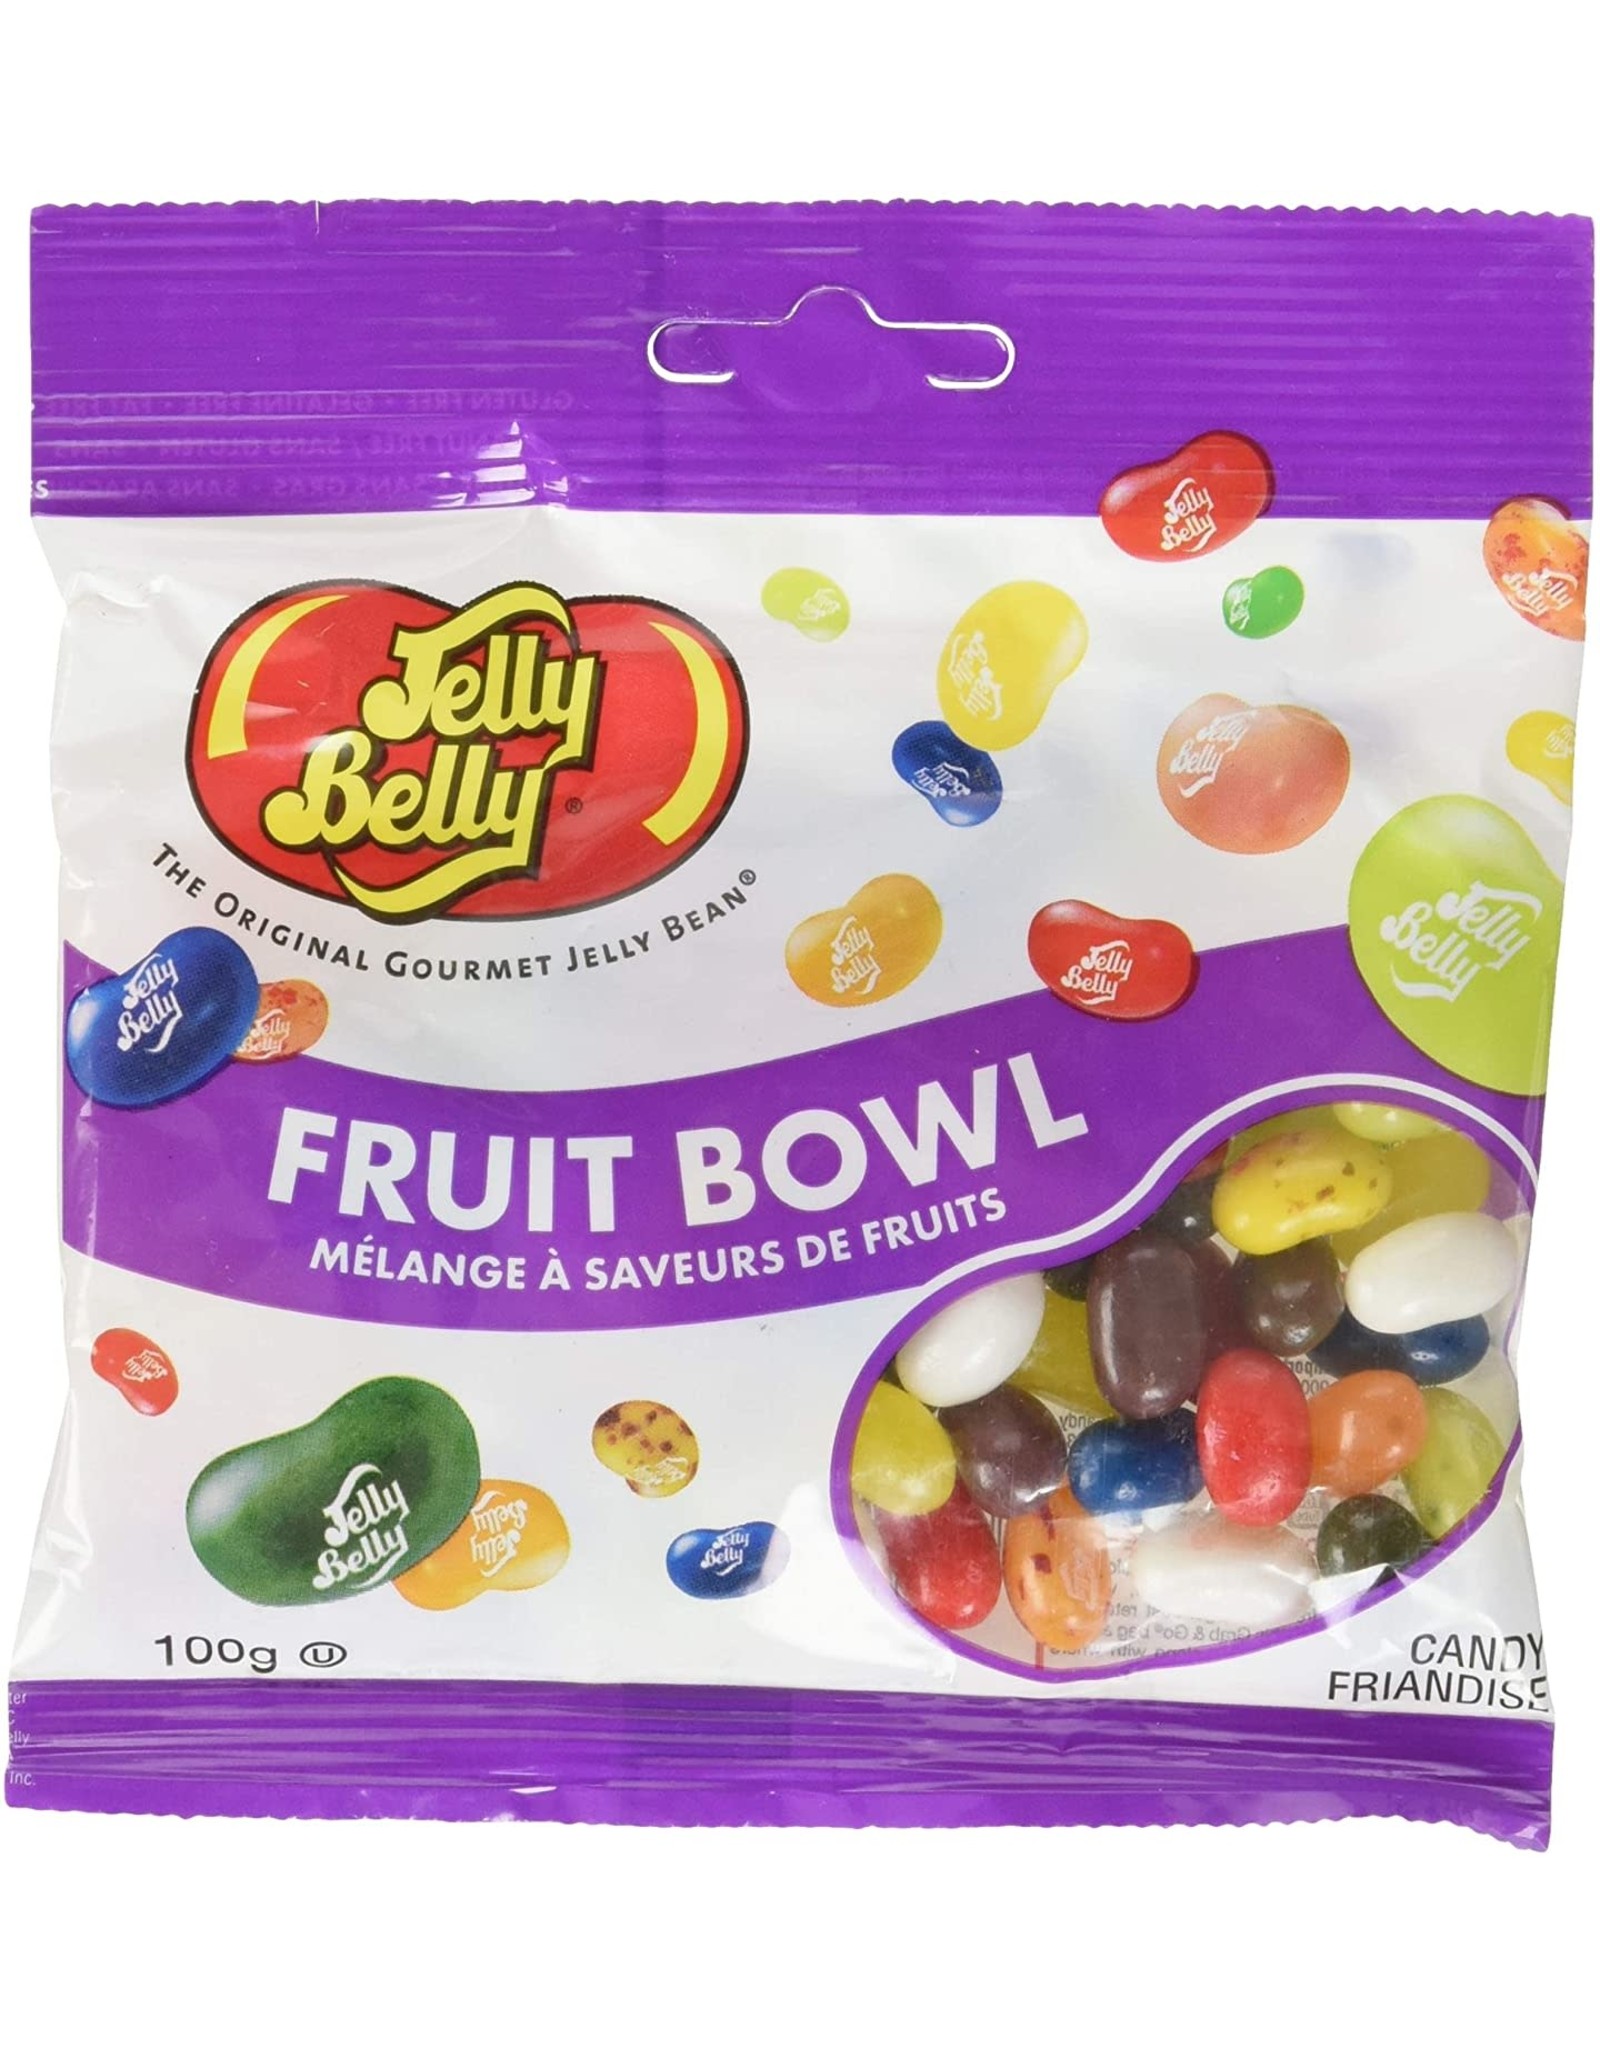 Jelly Belly Jelly Belly Beans Fruit Bowl